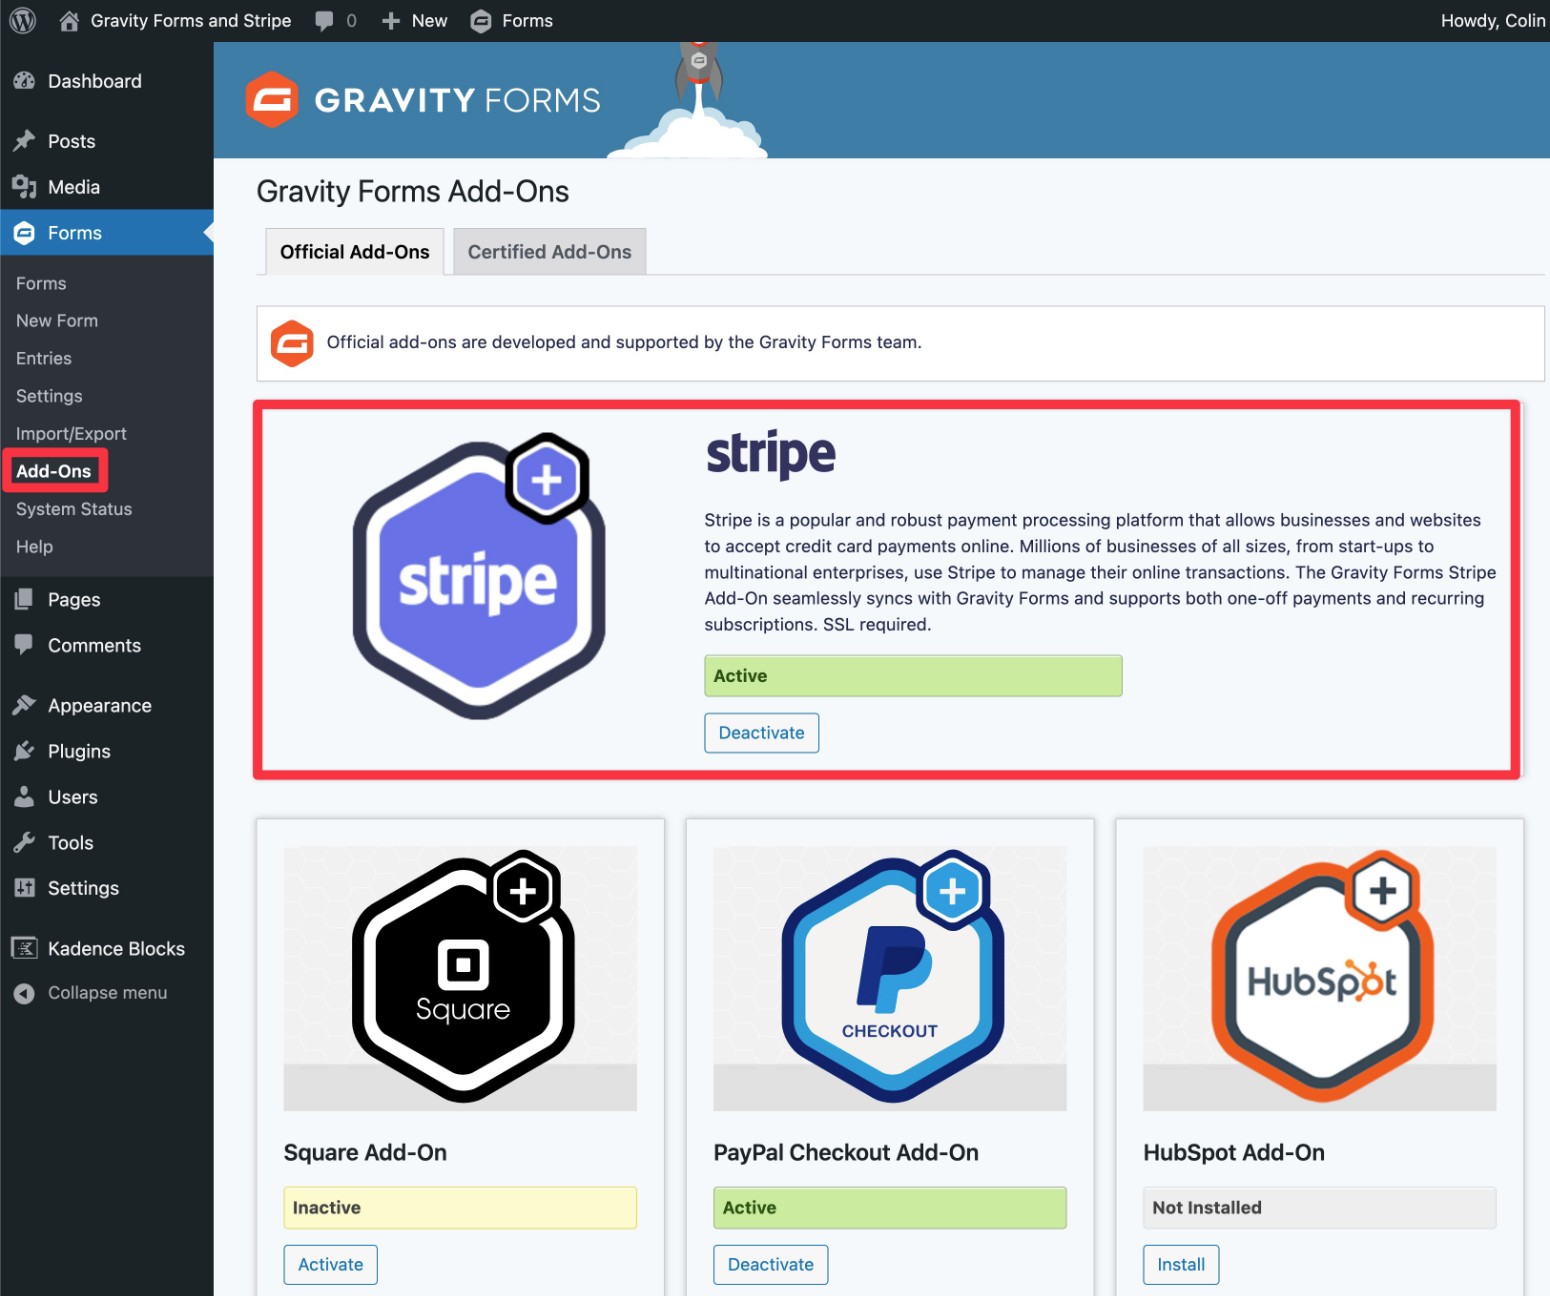 Install the Gravity Forms Stripe Add-on